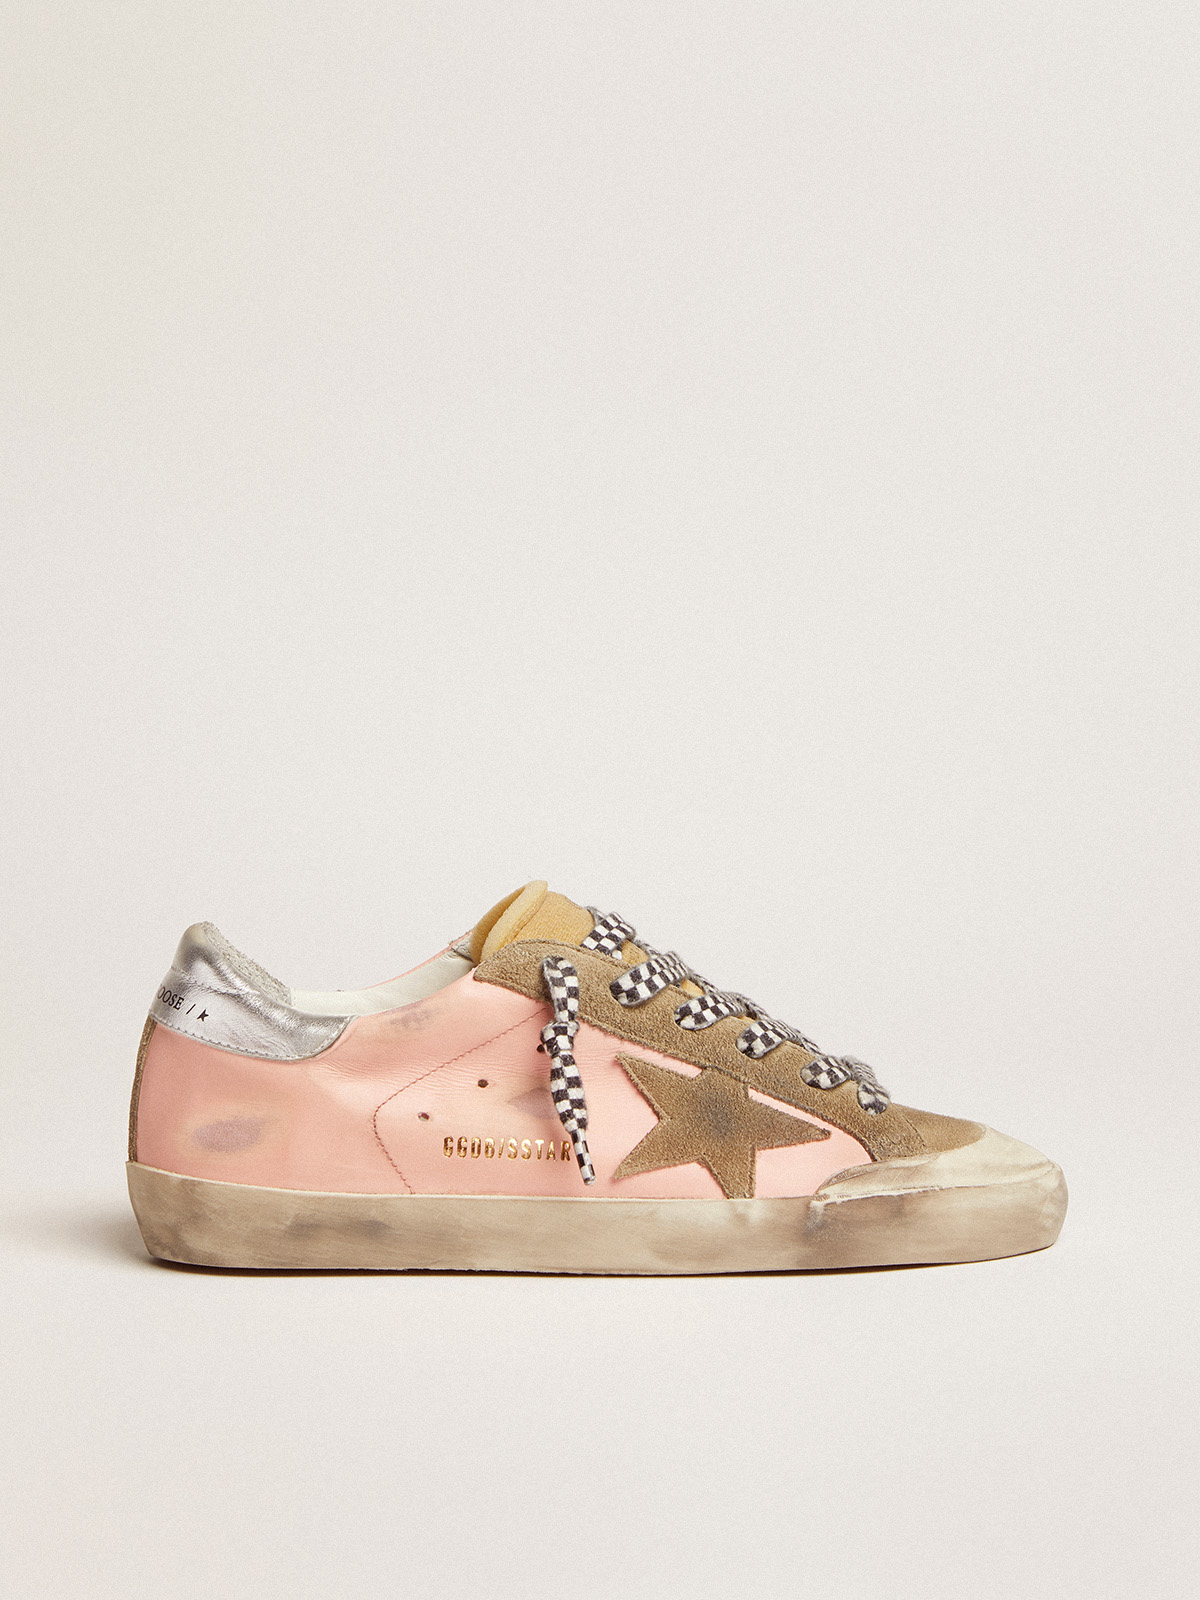 Women's Super-Star in pink leather and silver heel tab | Golden Goose